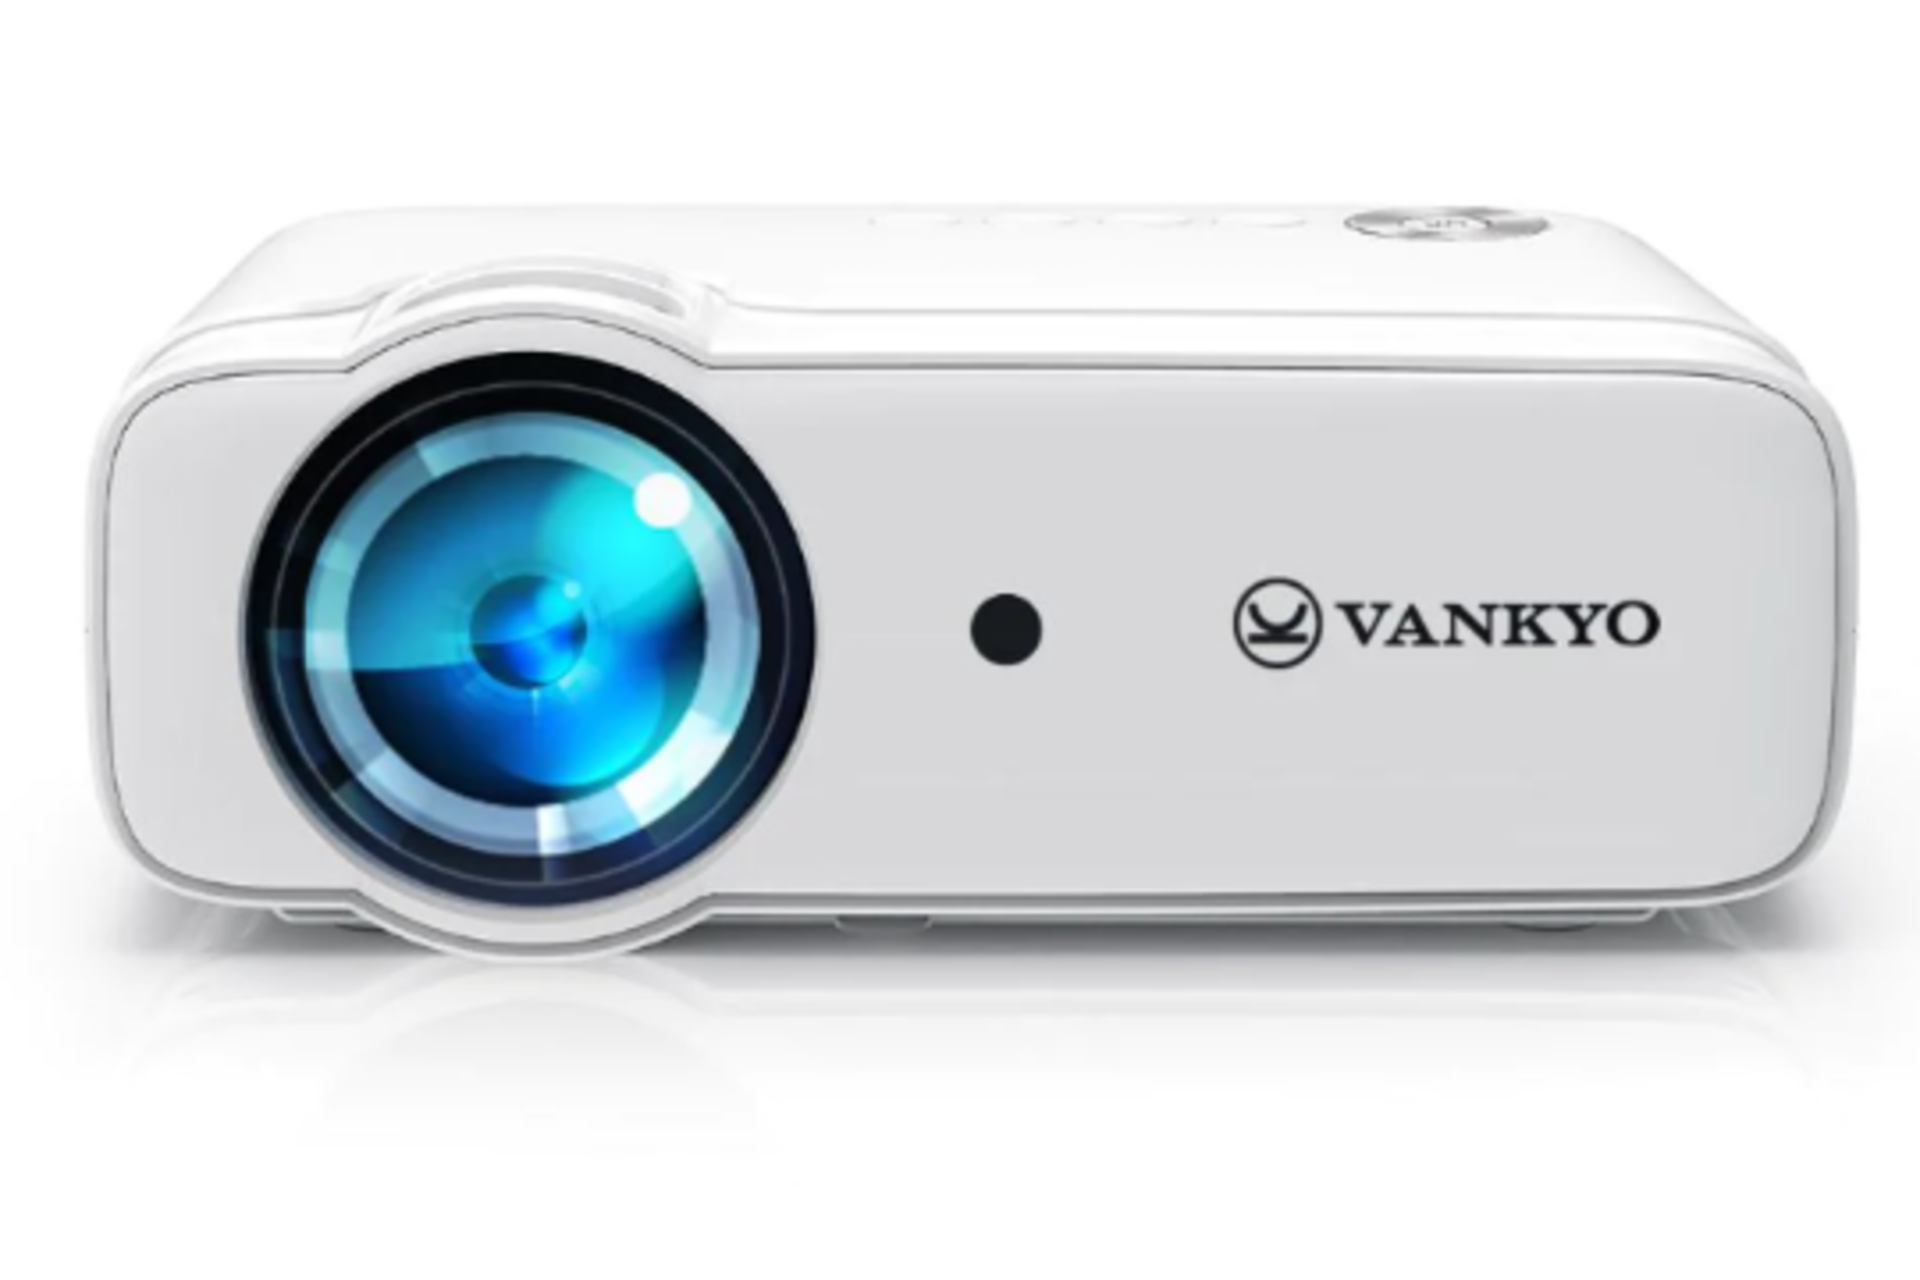 5 x New Boxed VANKYO Leisure 430 Mini Projector for Movie, Outdoor Entertainment, Native 720P. - Image 2 of 3